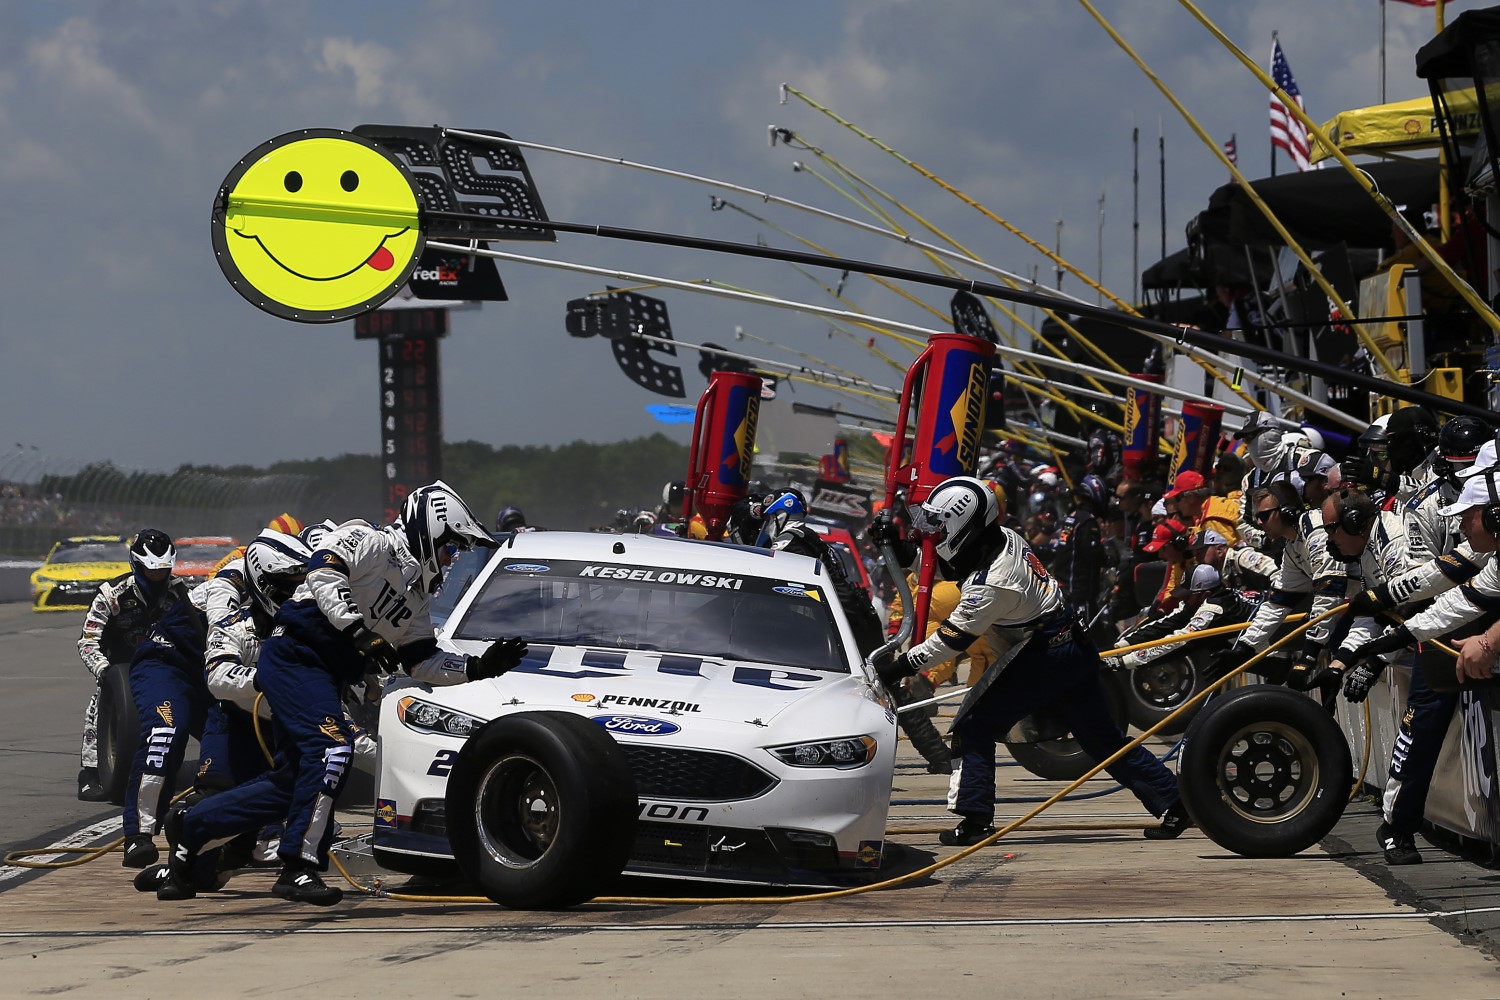 Keselowski's Penske team services his Ford - NASCAR teams find new ways to cheat every weekend